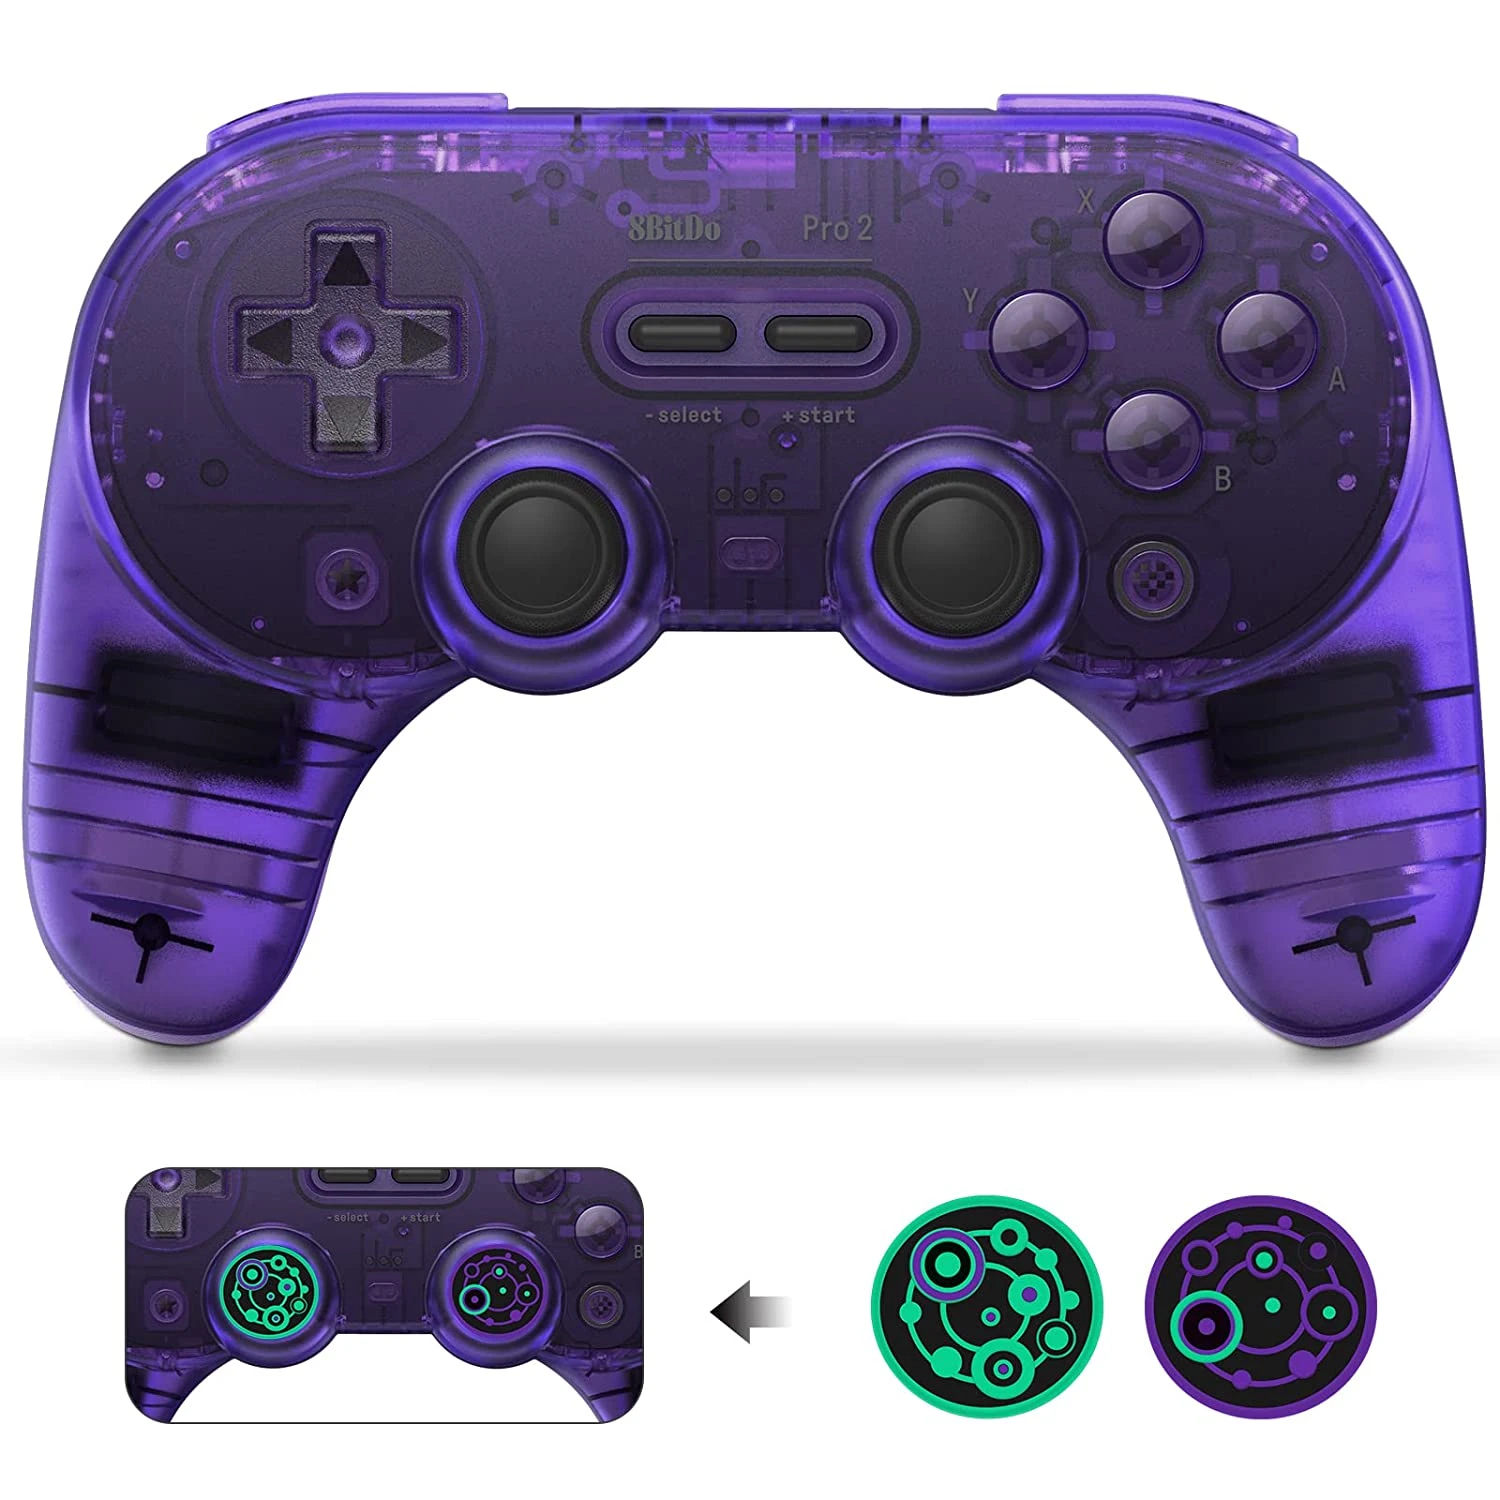 Pennenvriend schilder Score 8bitdo Pro 2 Special Edition Bluetooth Controller Wireless Joystick Gamepad  For Switch Pc Macos Android Steam Raspberry Pi - Gamepads - AliExpress